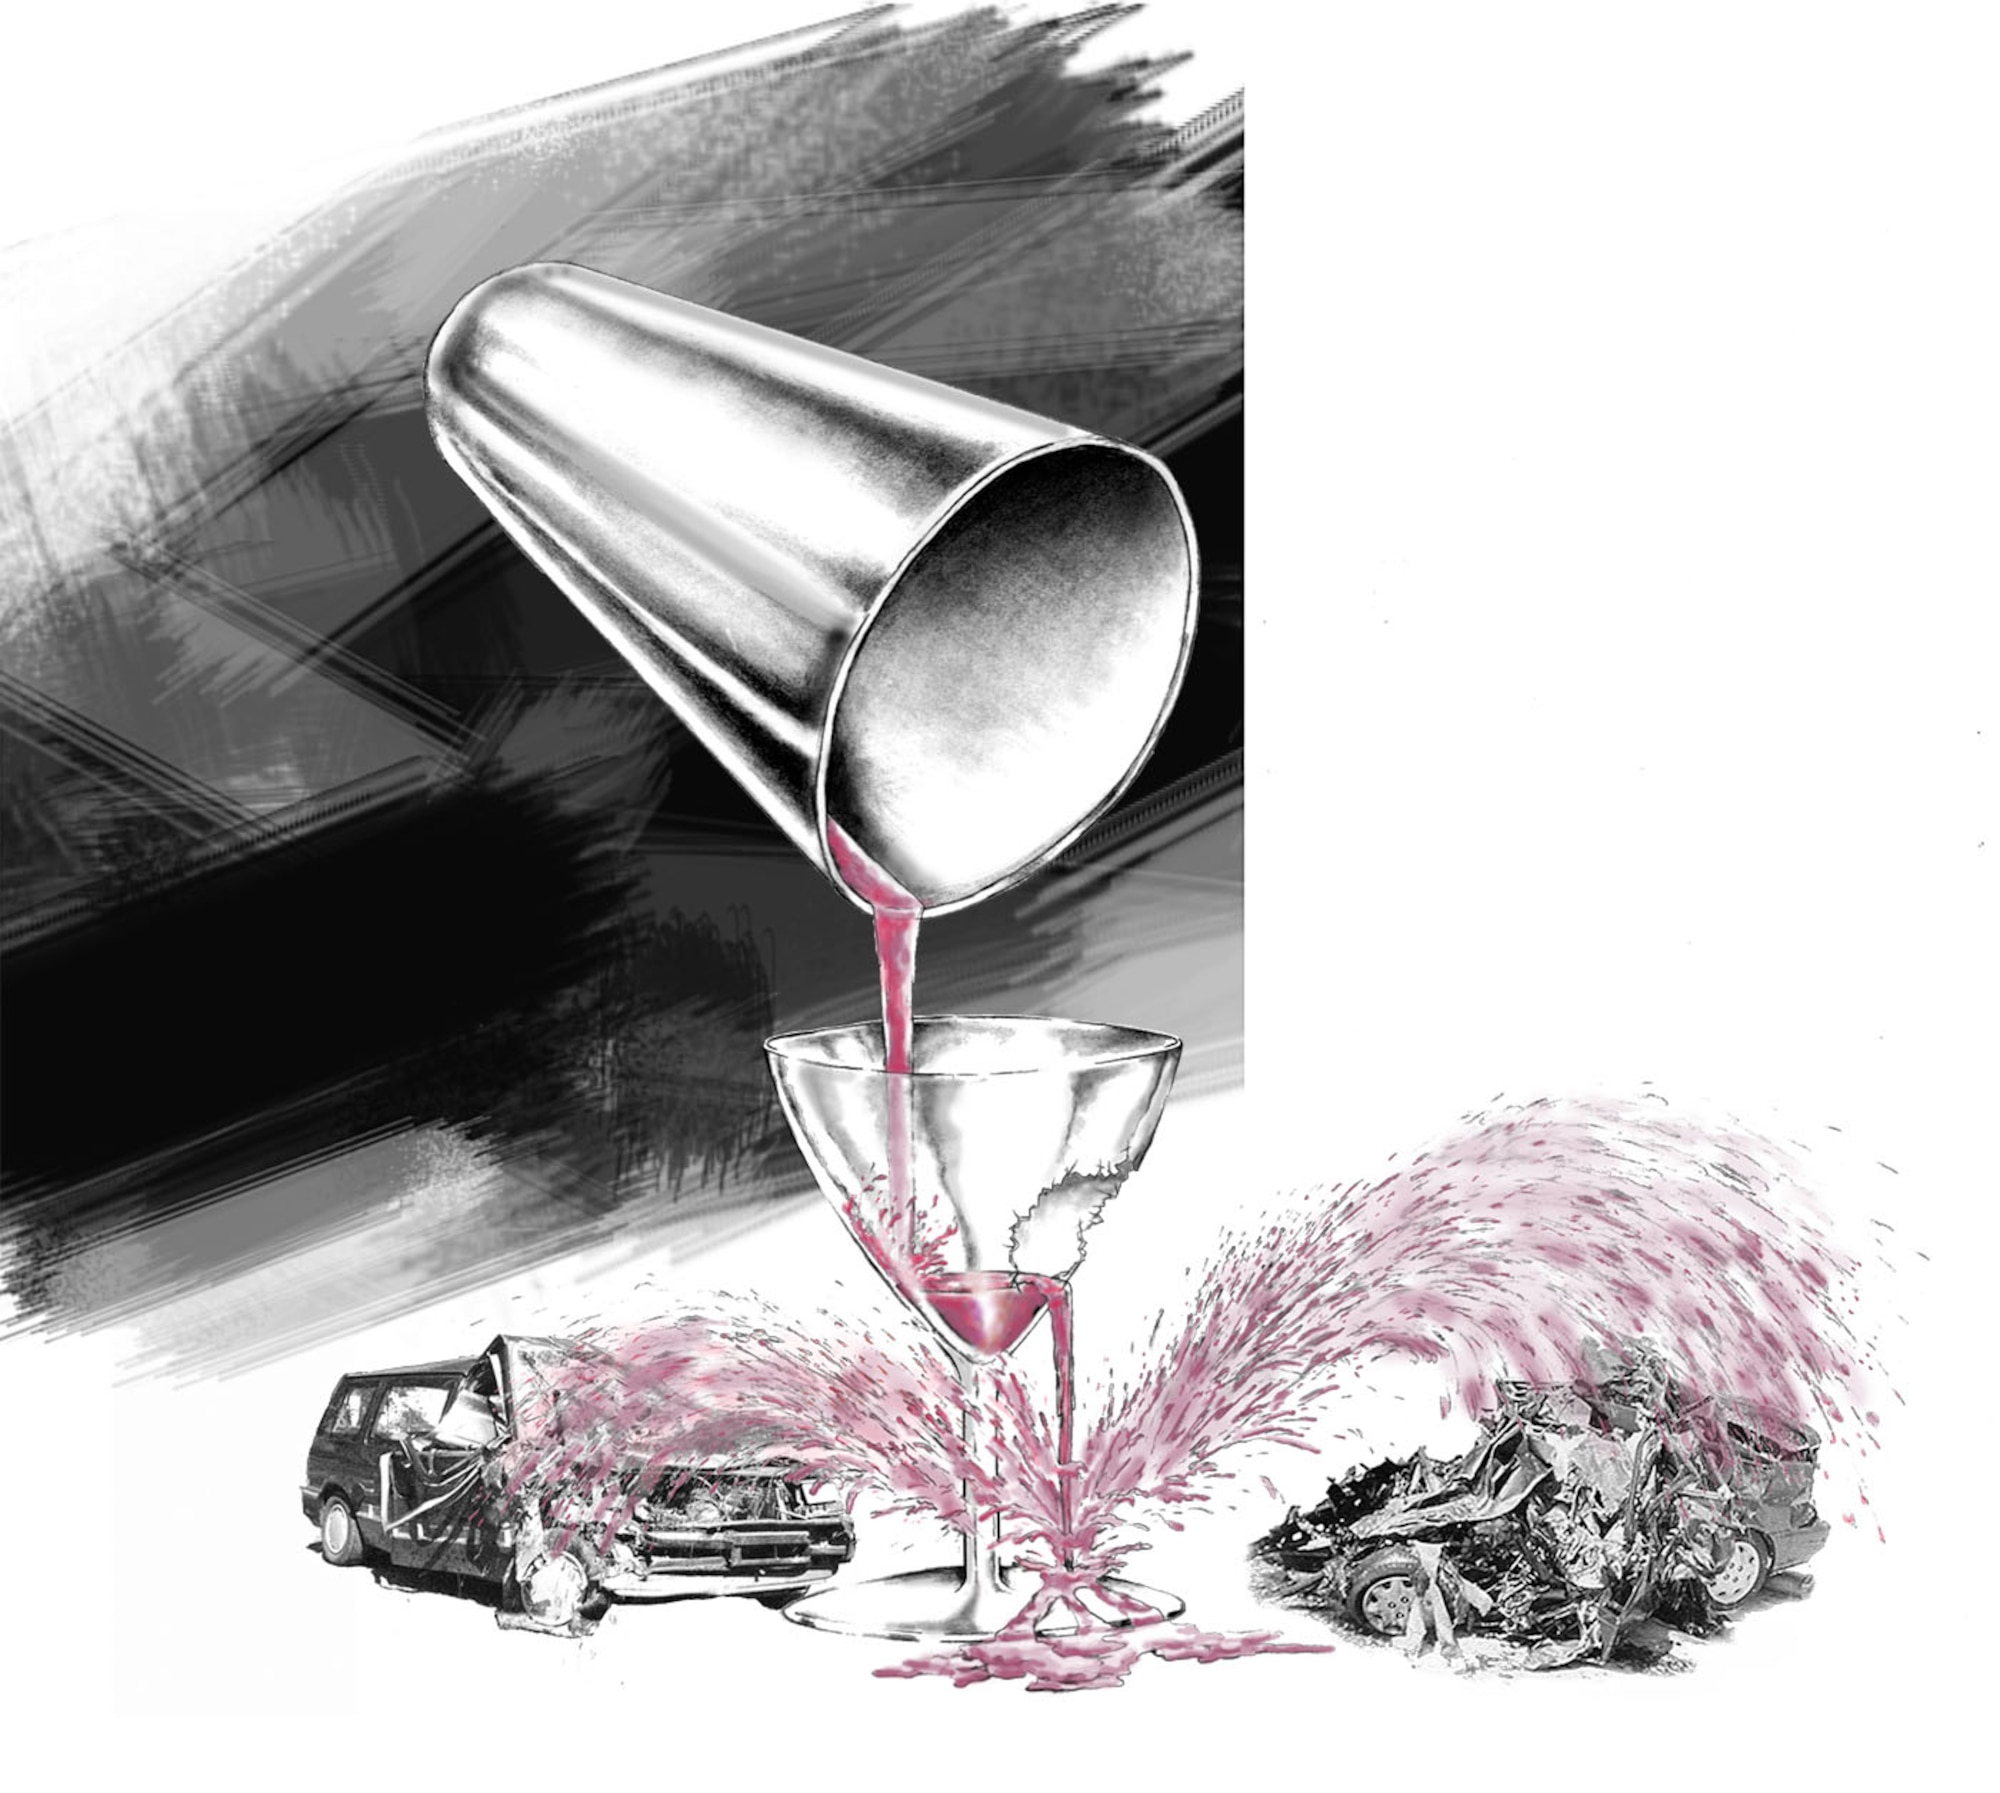 A martini shaker pouring alcohol into a broken glass with the alcohol splattering onto two wrecked vehicles, illustrating the consequences of DUI in this story. (composite illustration by Sammie W. King)